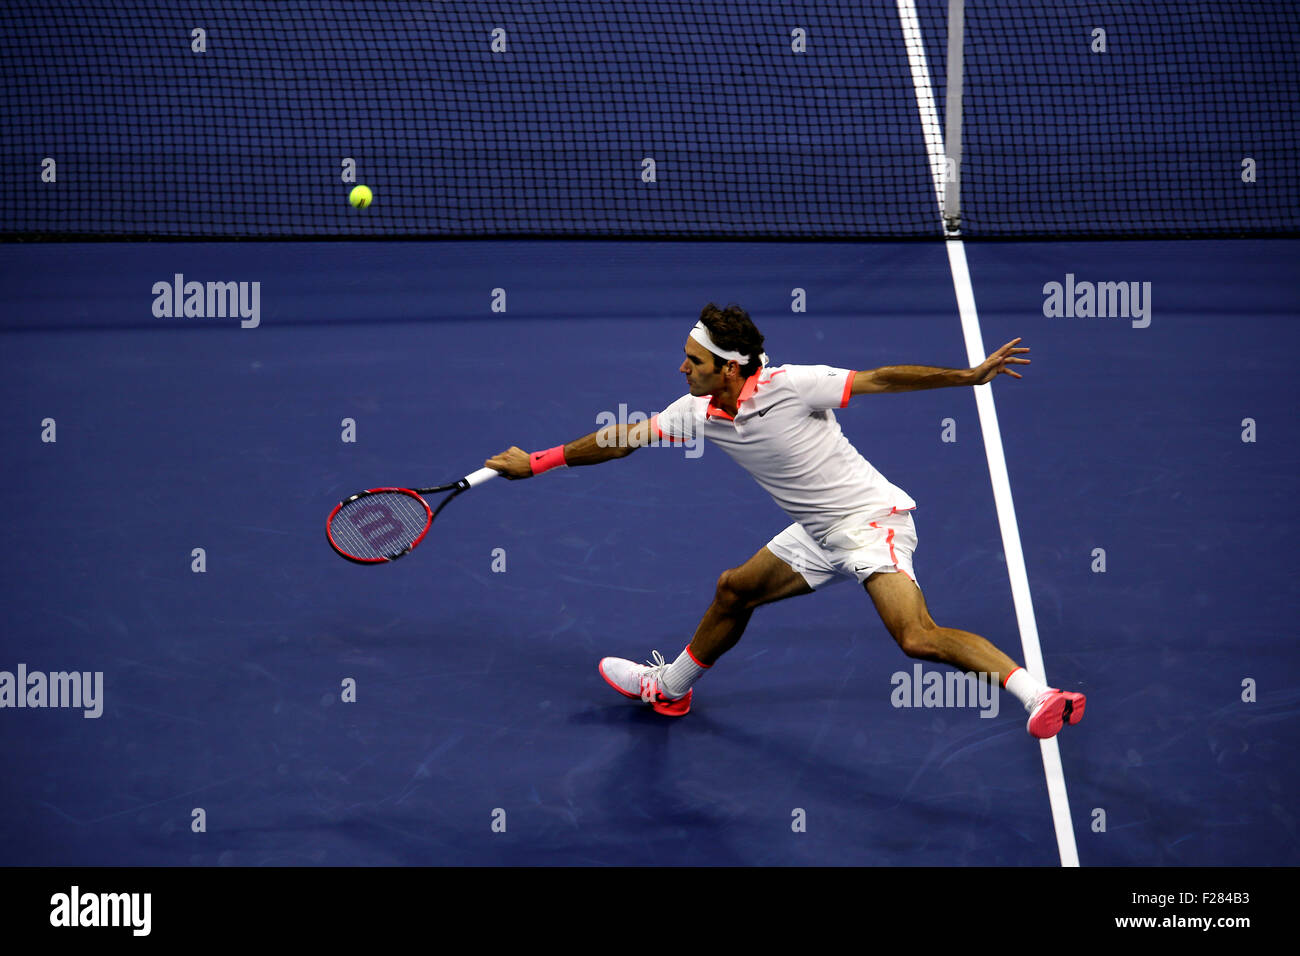 New York, USA. 13th Sep, 2015. Roger Federer lunges for a volley against Novak Djokovic of Serbia in the final of the U.S. Open. Djokovic defeated Federer 6-4, 5-7, 6-4, 6-4 to win his second U.S Open title at Flushing Meadows, New York on September 13th, 2015. Credit:  Adam Stoltman/Alamy Live News Stock Photo